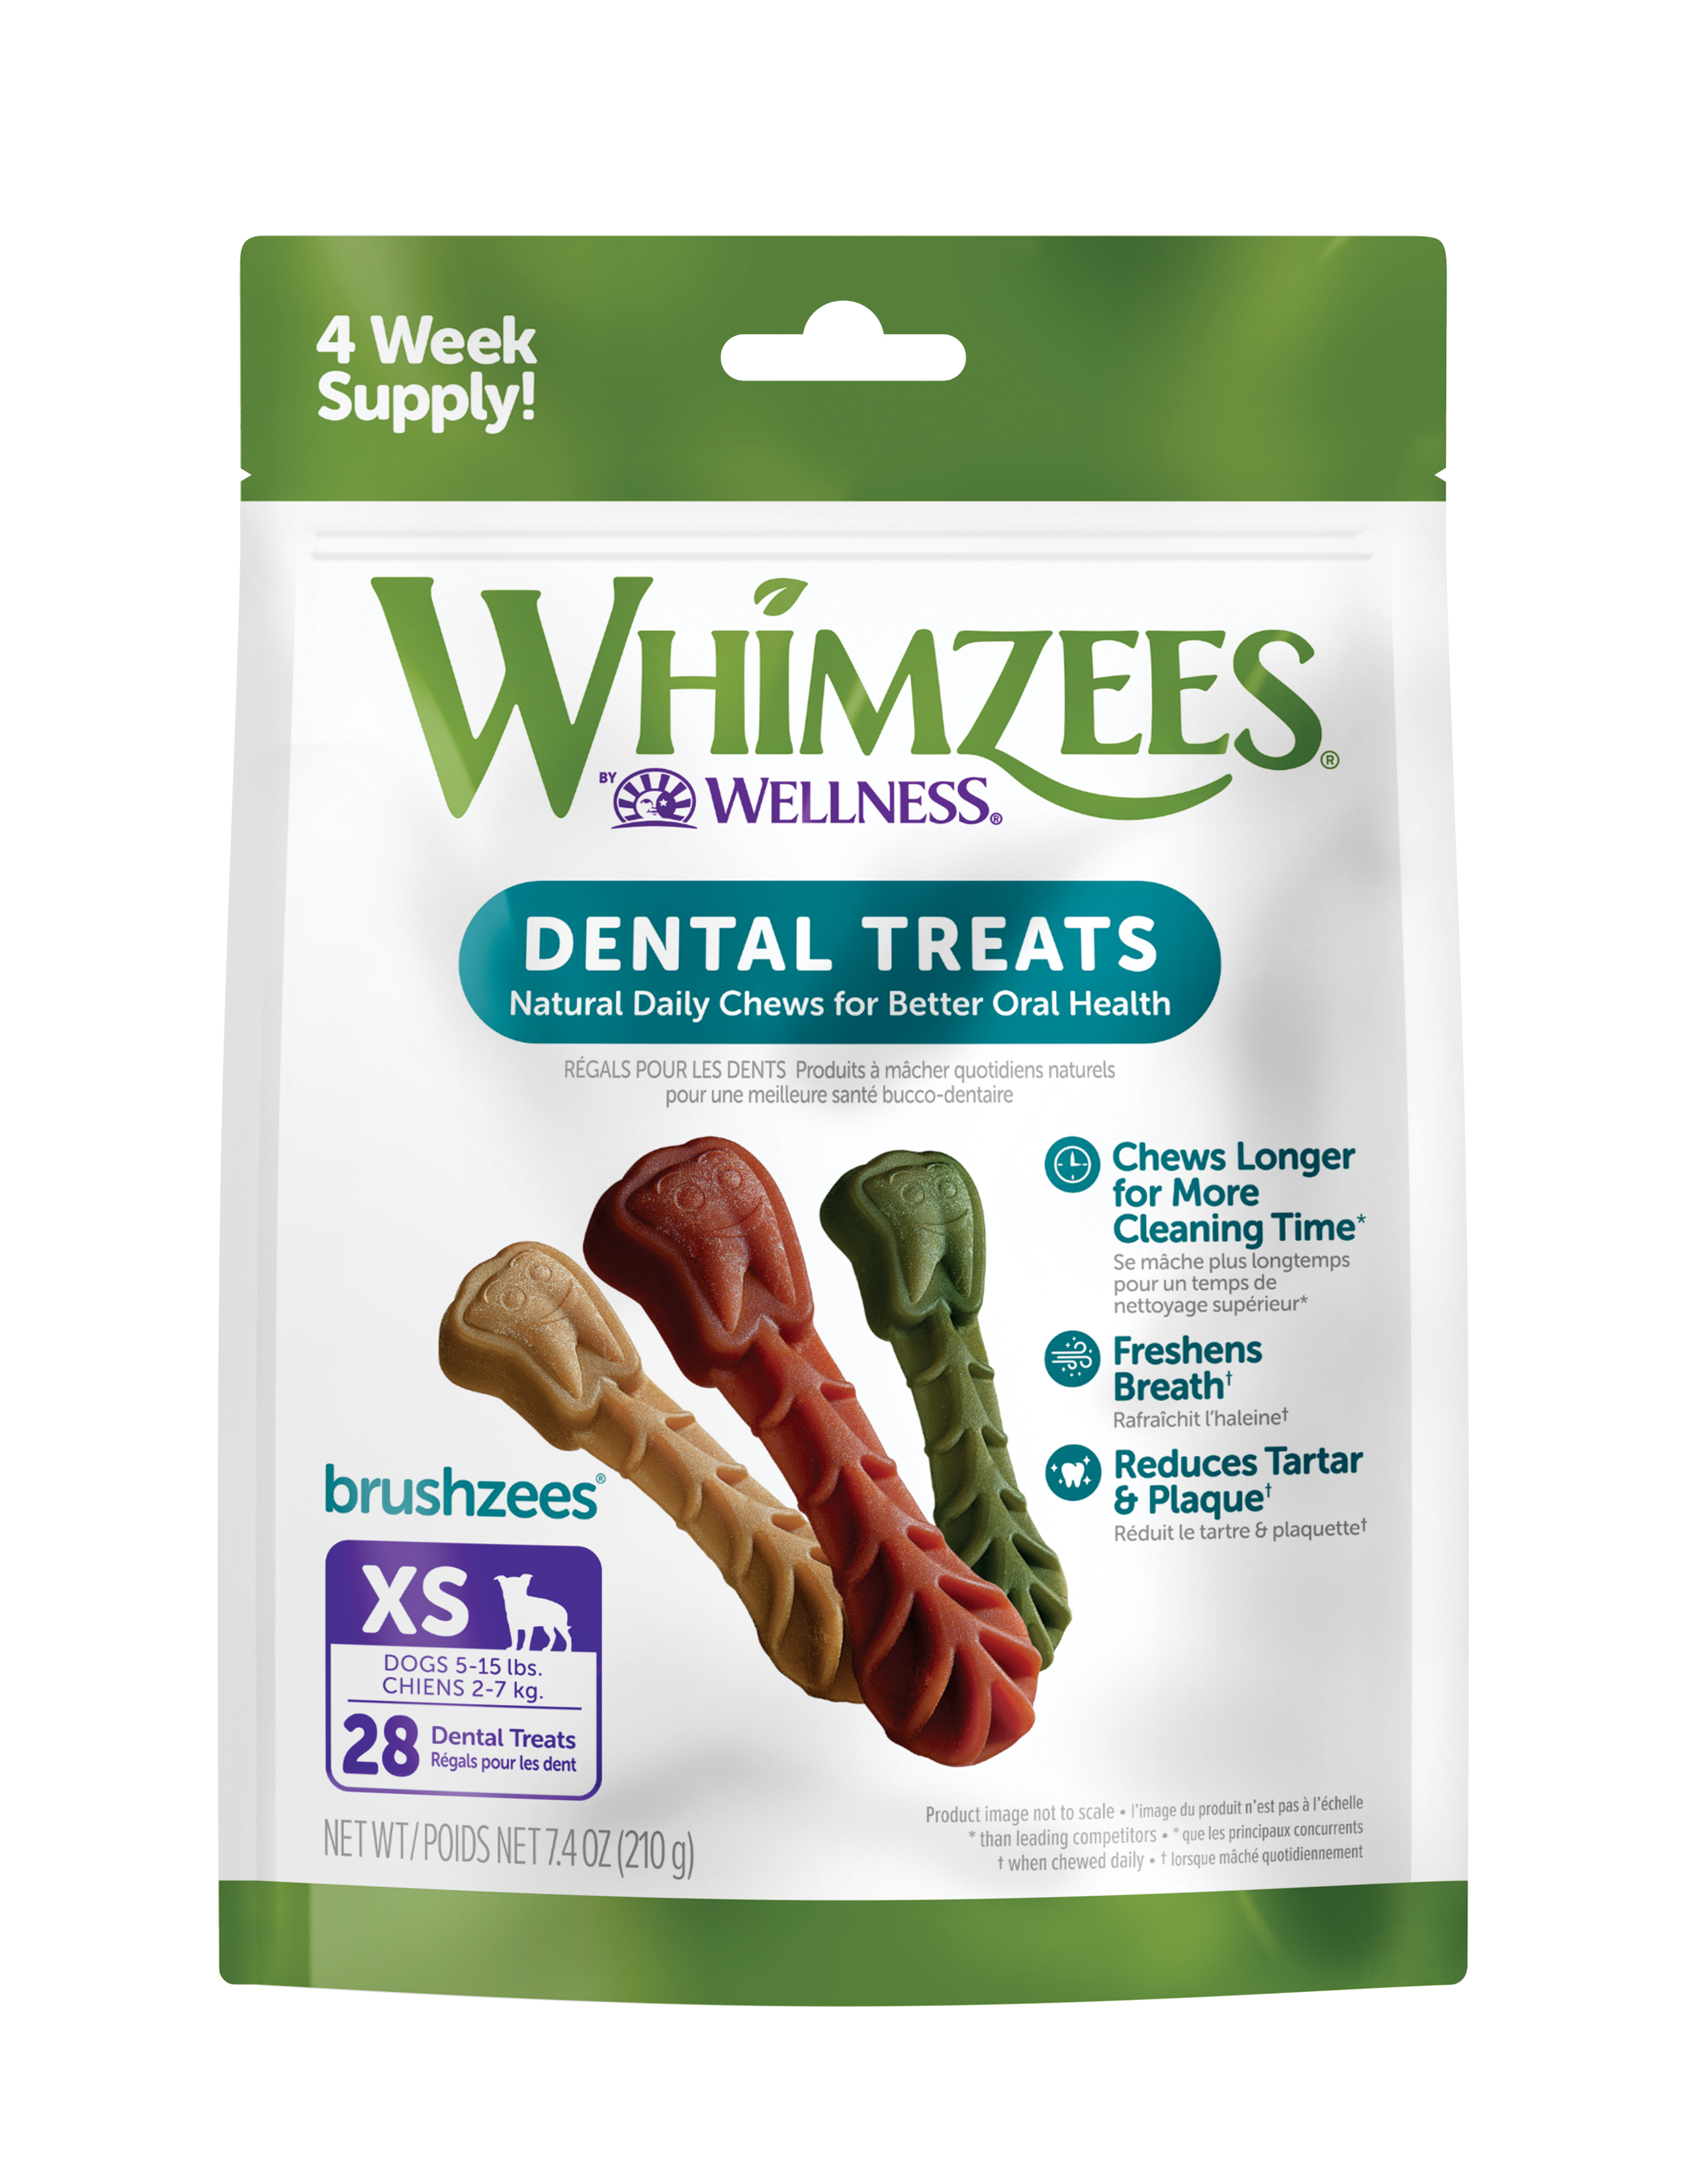 WHIMZEES Daily Use Pack Brushzees